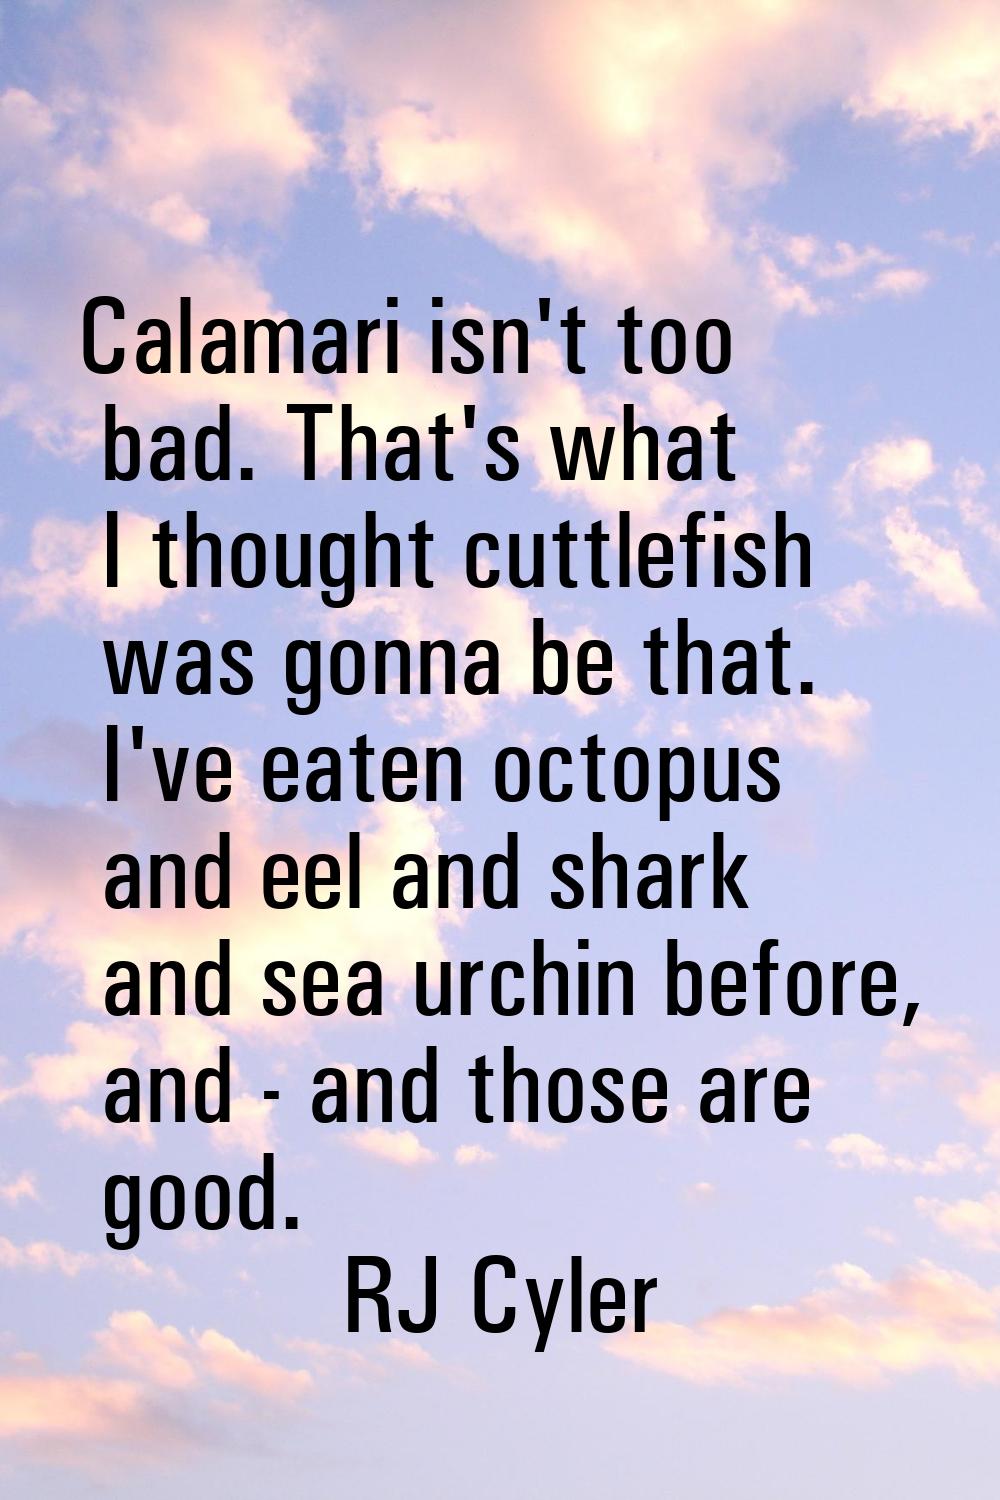 Calamari isn't too bad. That's what I thought cuttlefish was gonna be that. I've eaten octopus and 